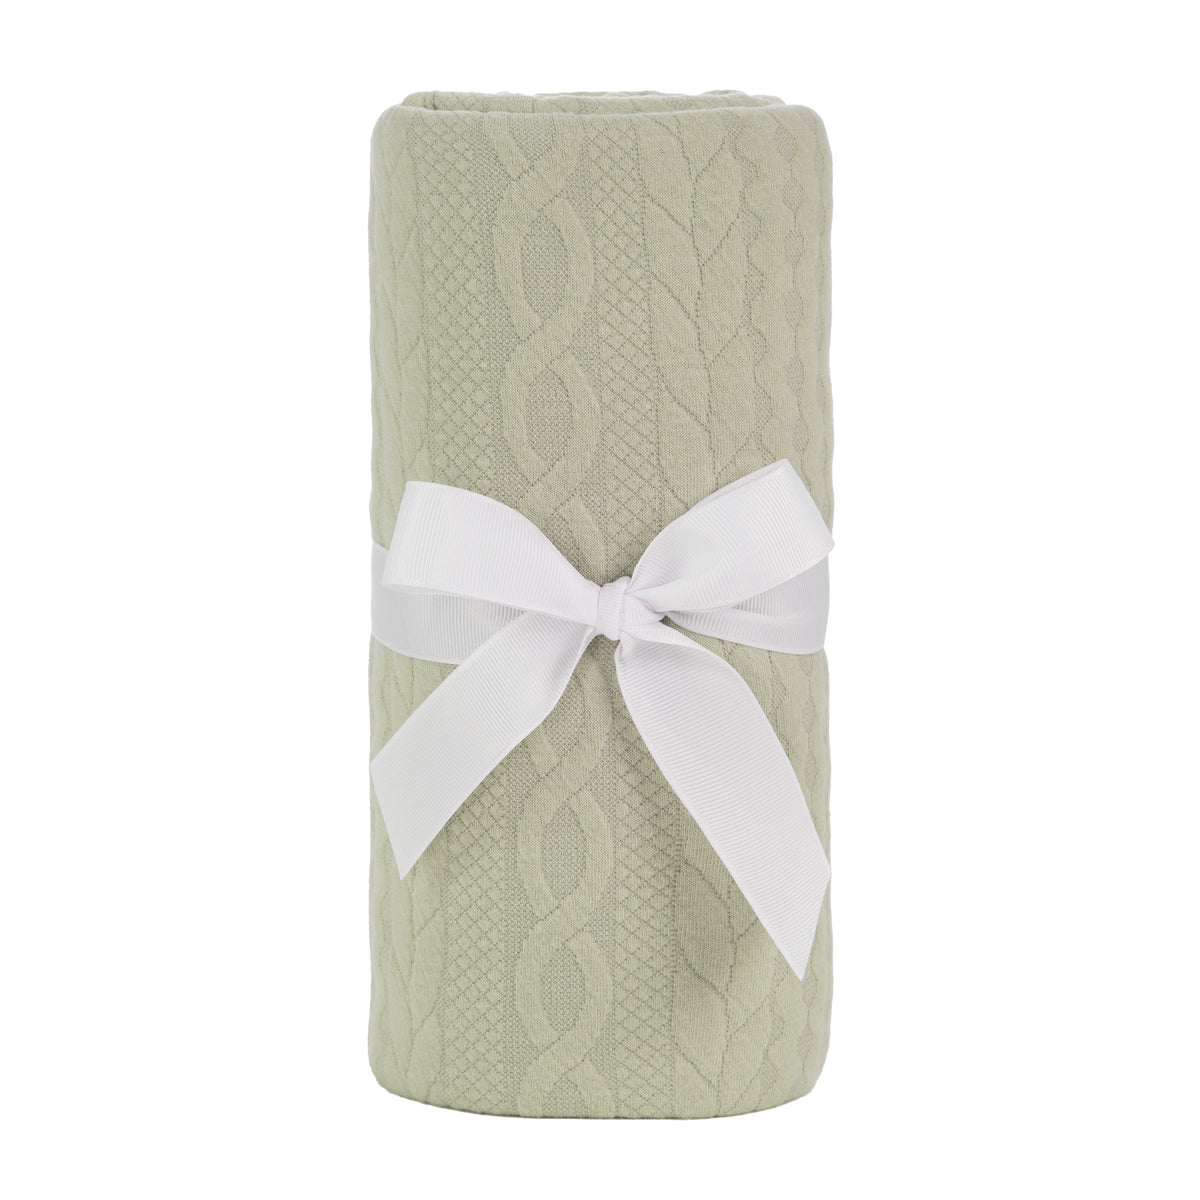 Sealy Baby Knit Blanket - Dusty Olive